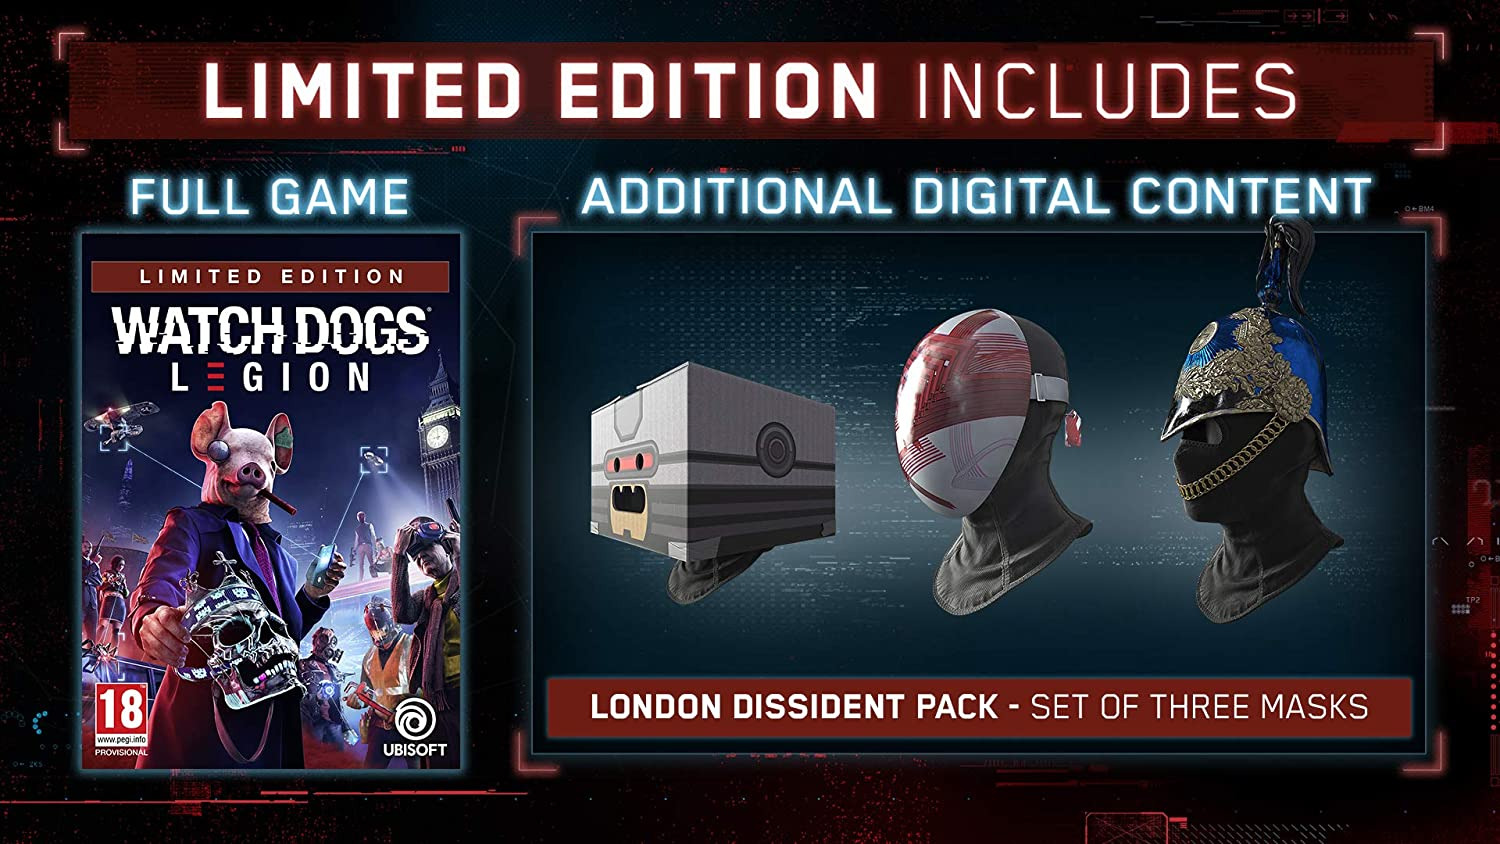 watch dogs legion ultimate pack